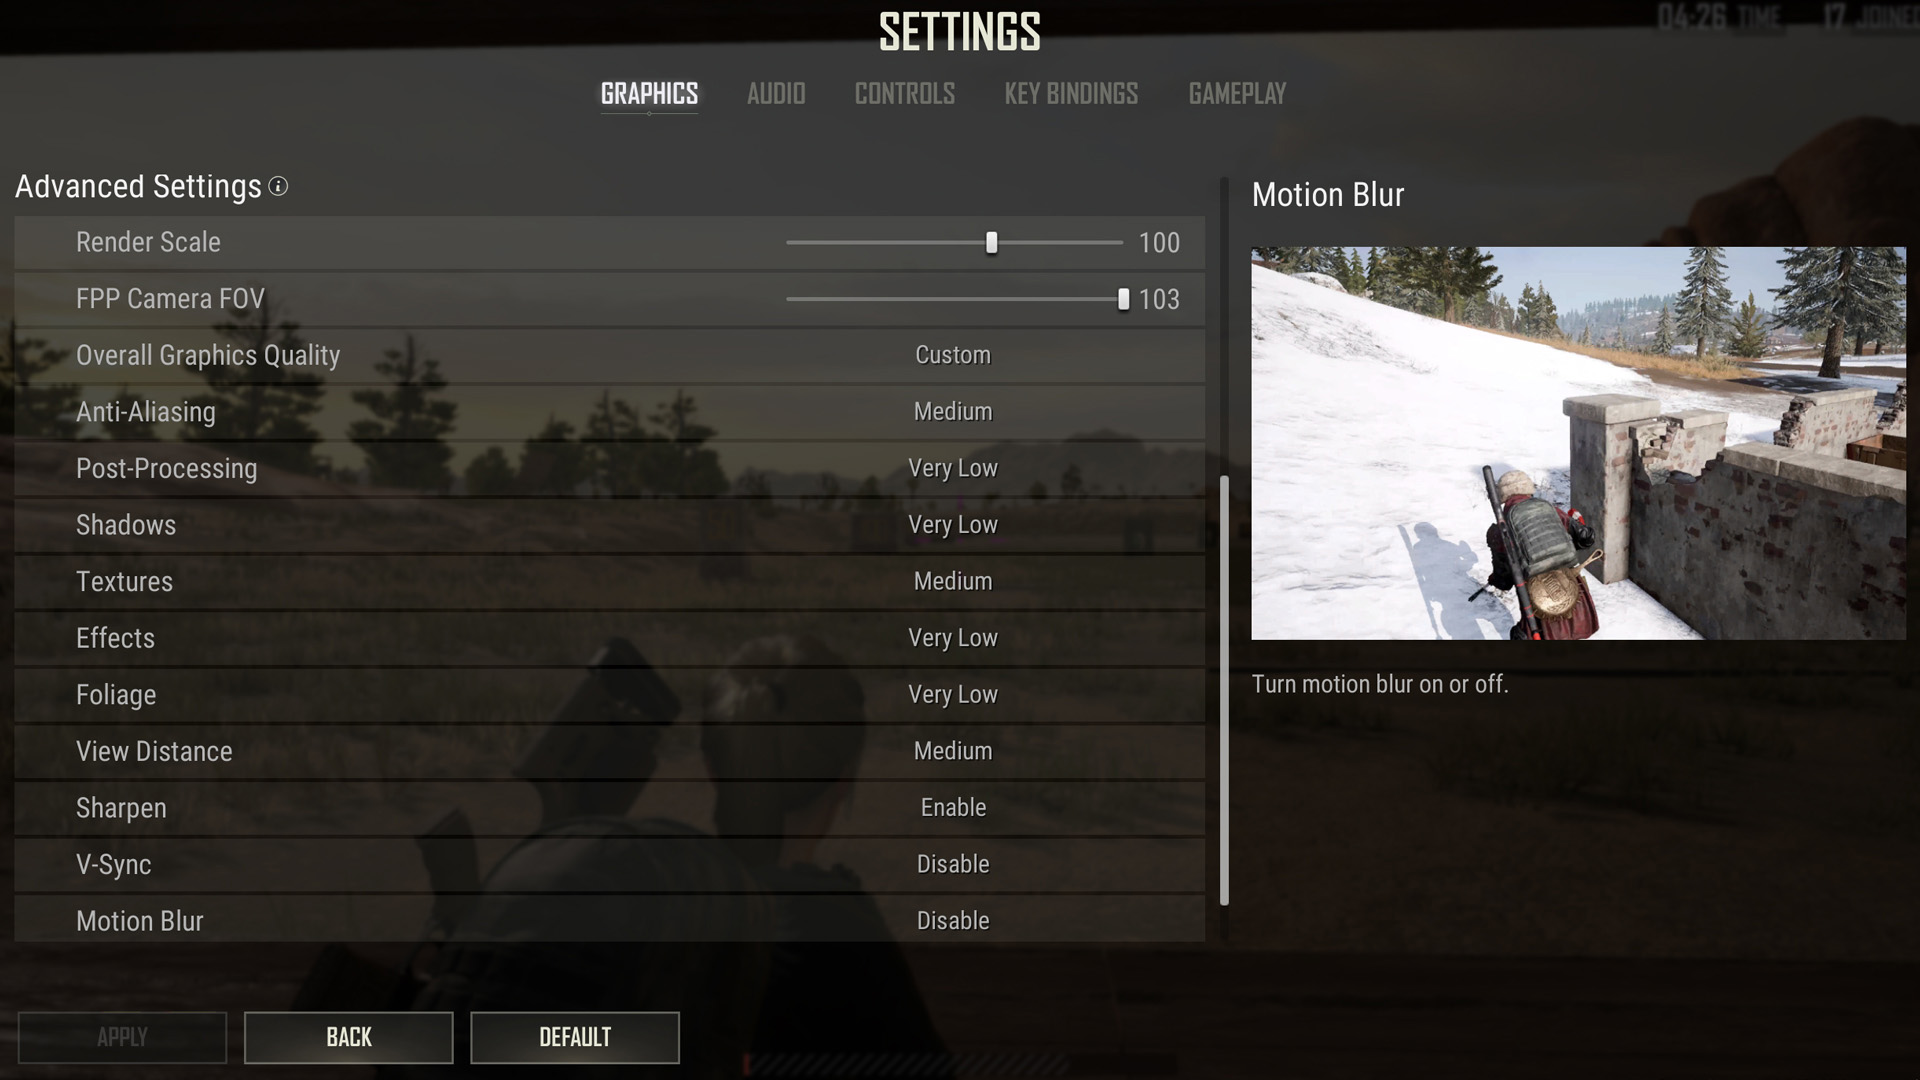 Playerunknown's battlegrounds best PUBG settings: the graphics menu in the PUBG settings